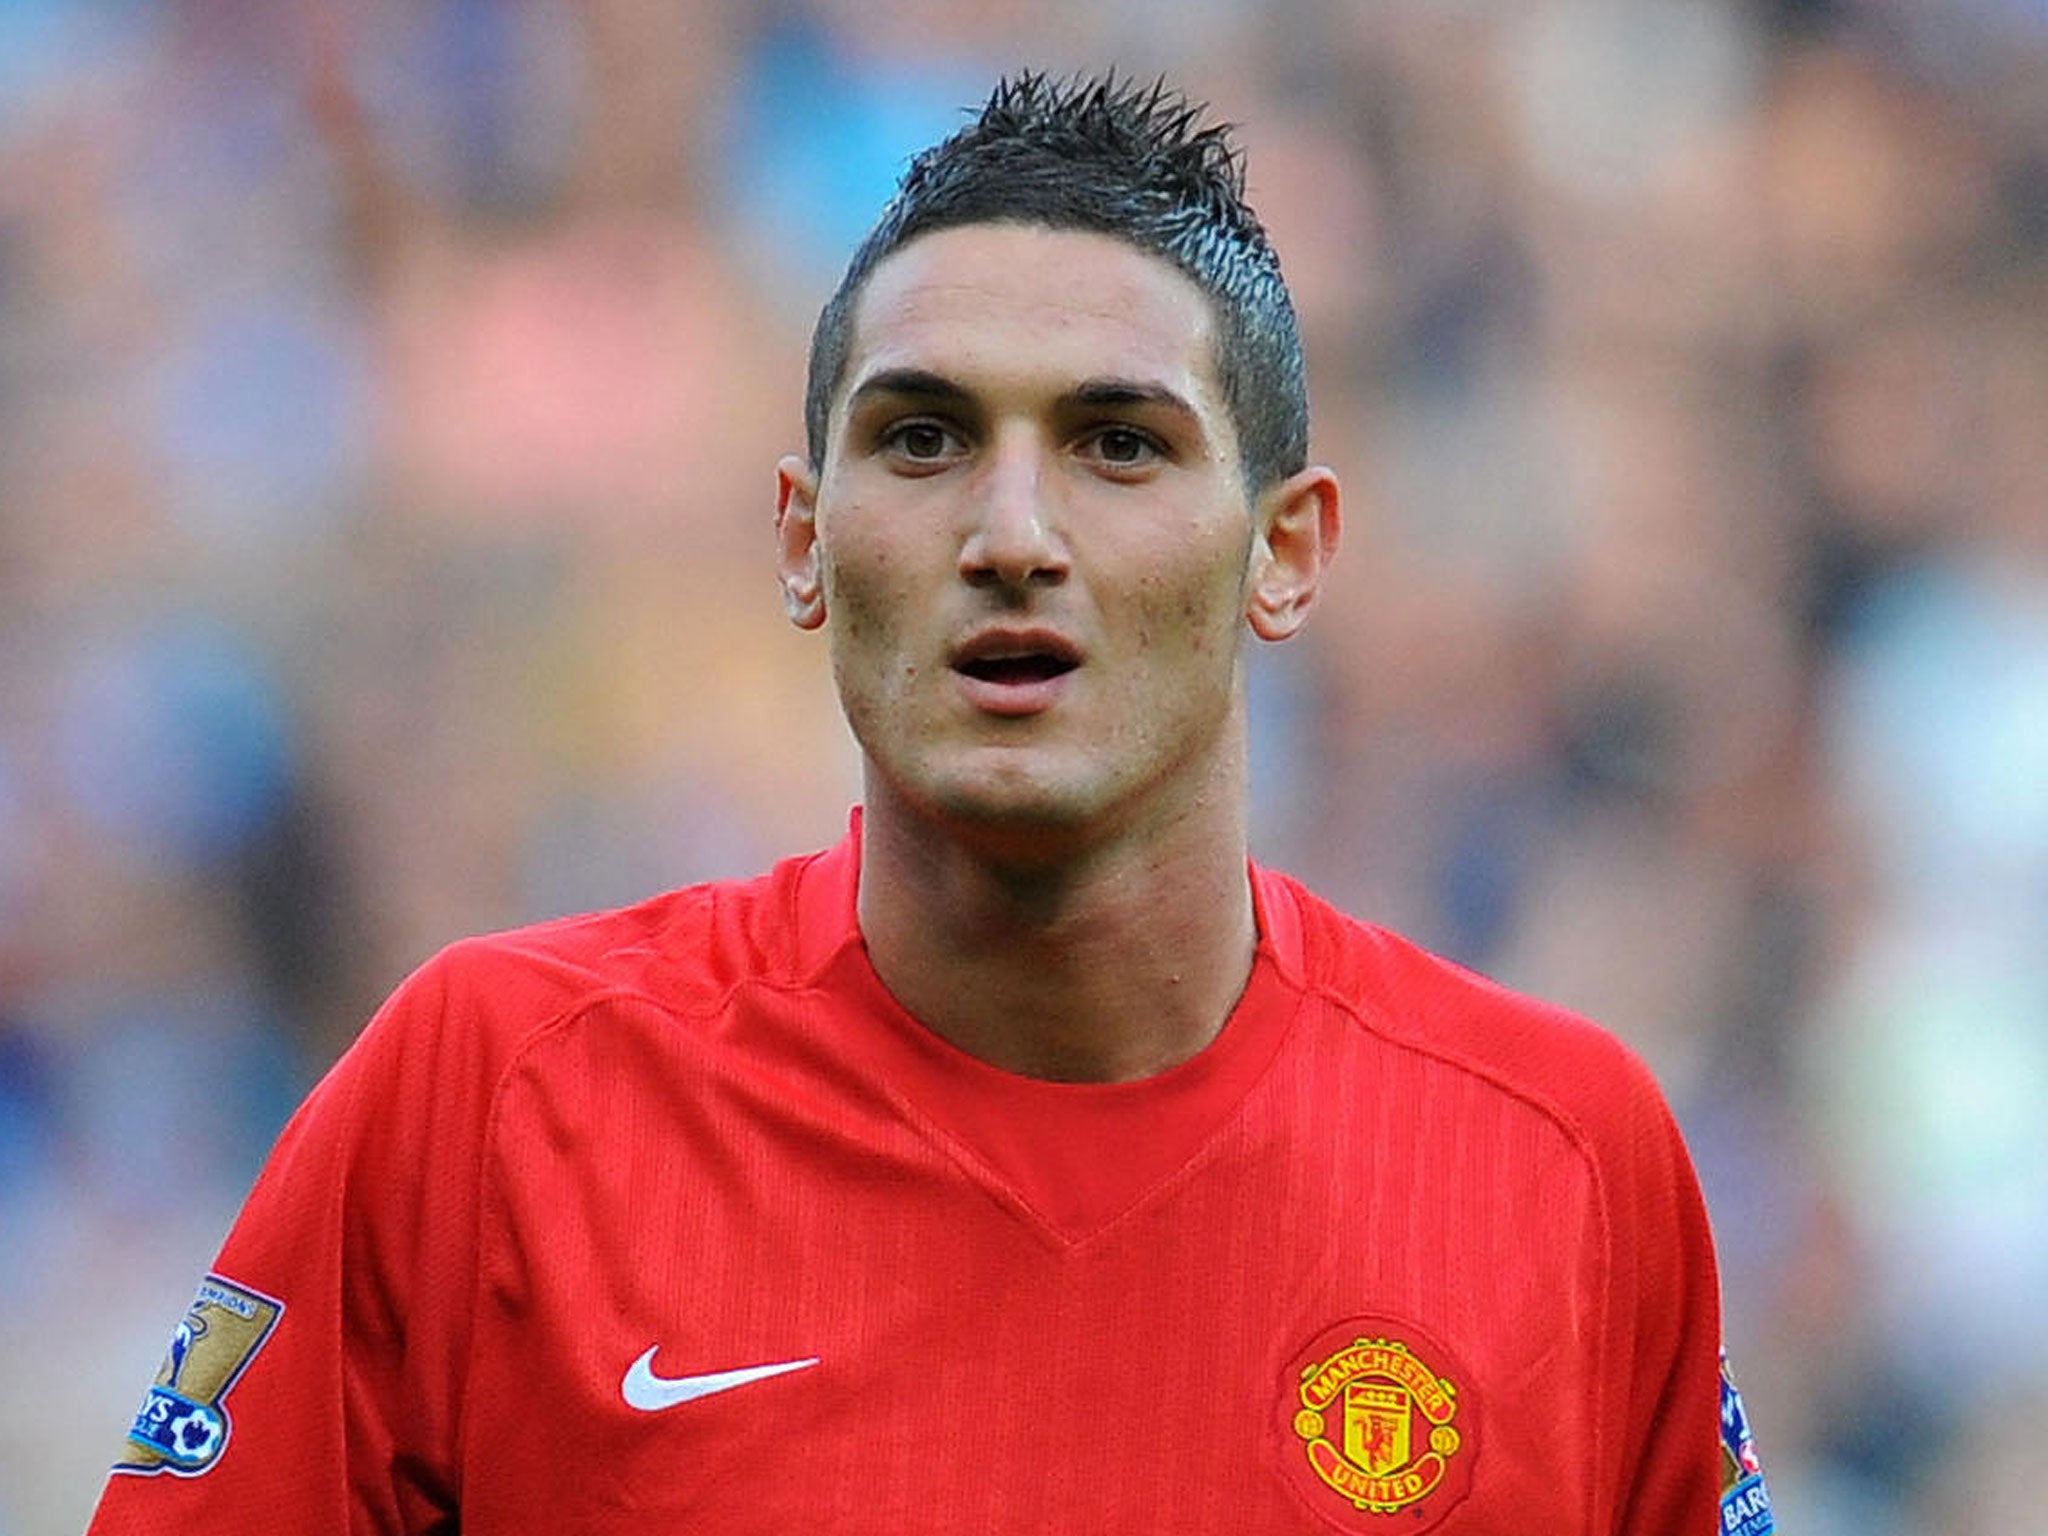 Macheda made a total of 36 appearances for United and scored five goals